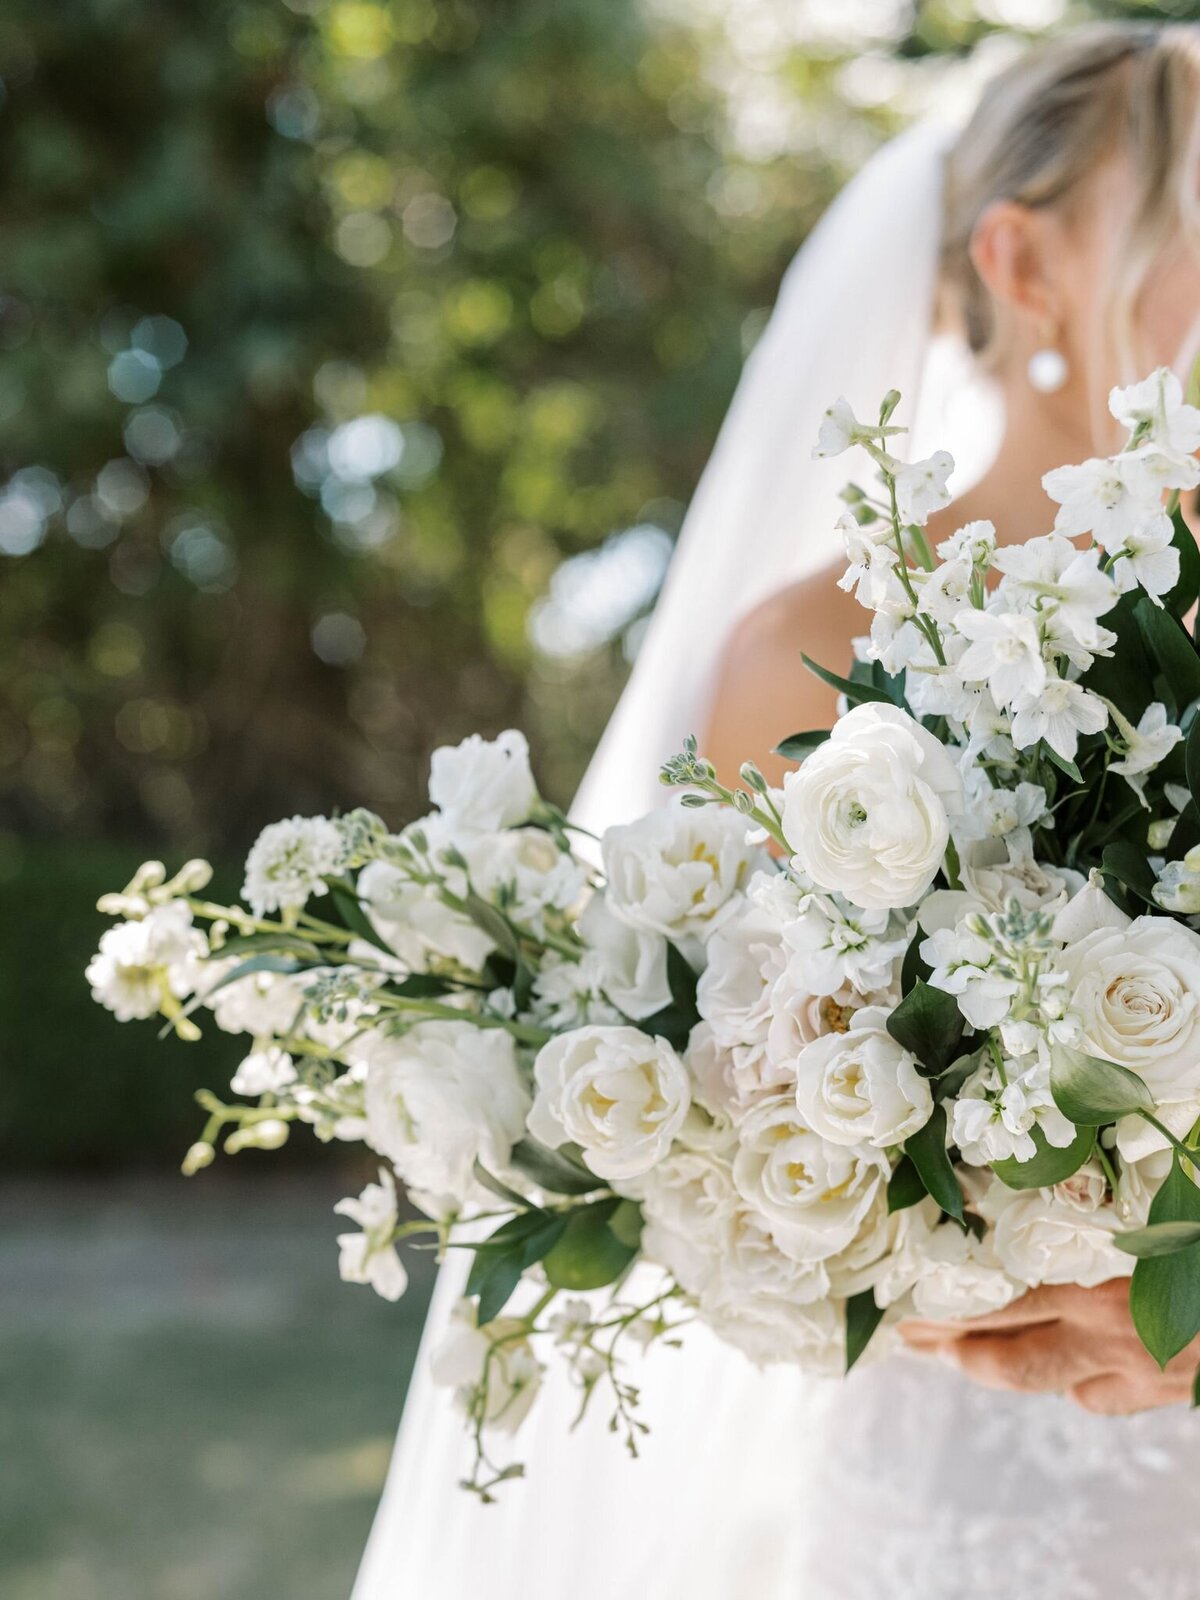 The bride holds a large white with green accent bouquet by Primrose and Petals.